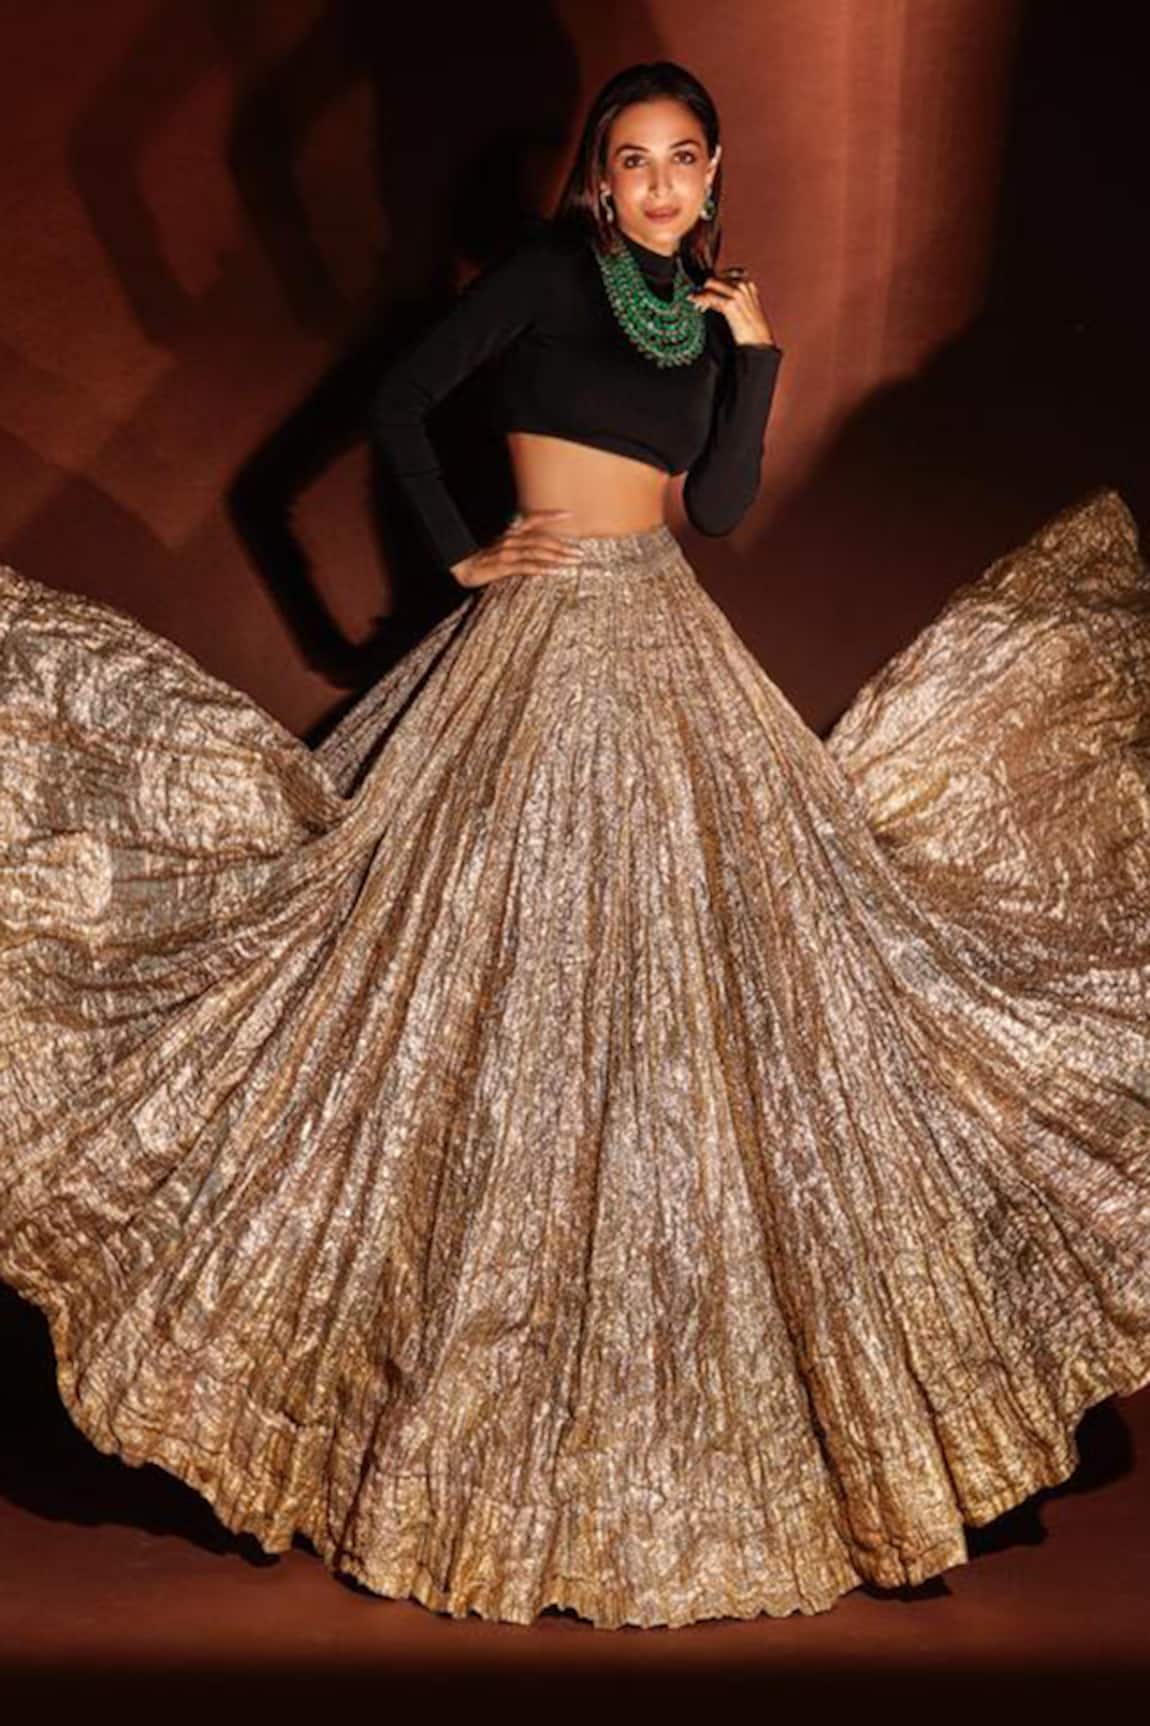 Glamorous in Gold: Handcrafted Peplum Crop Top Lehenga for Your Party